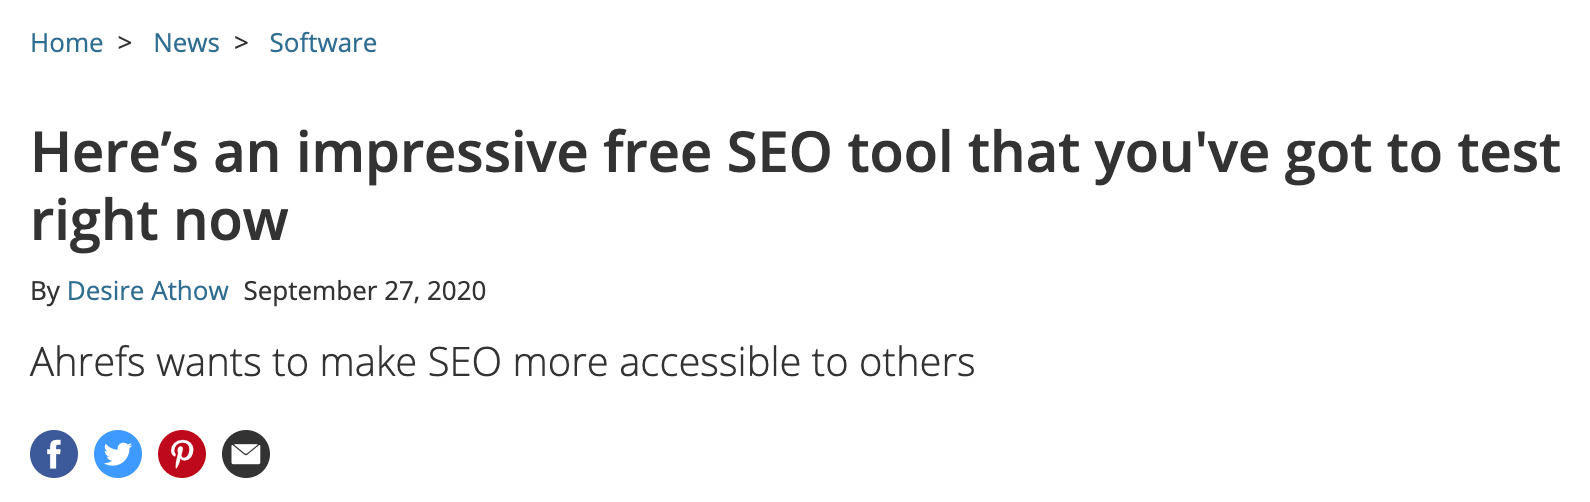 Here s an impressive free SEO tool that you ve got to test right now TechRadar 1